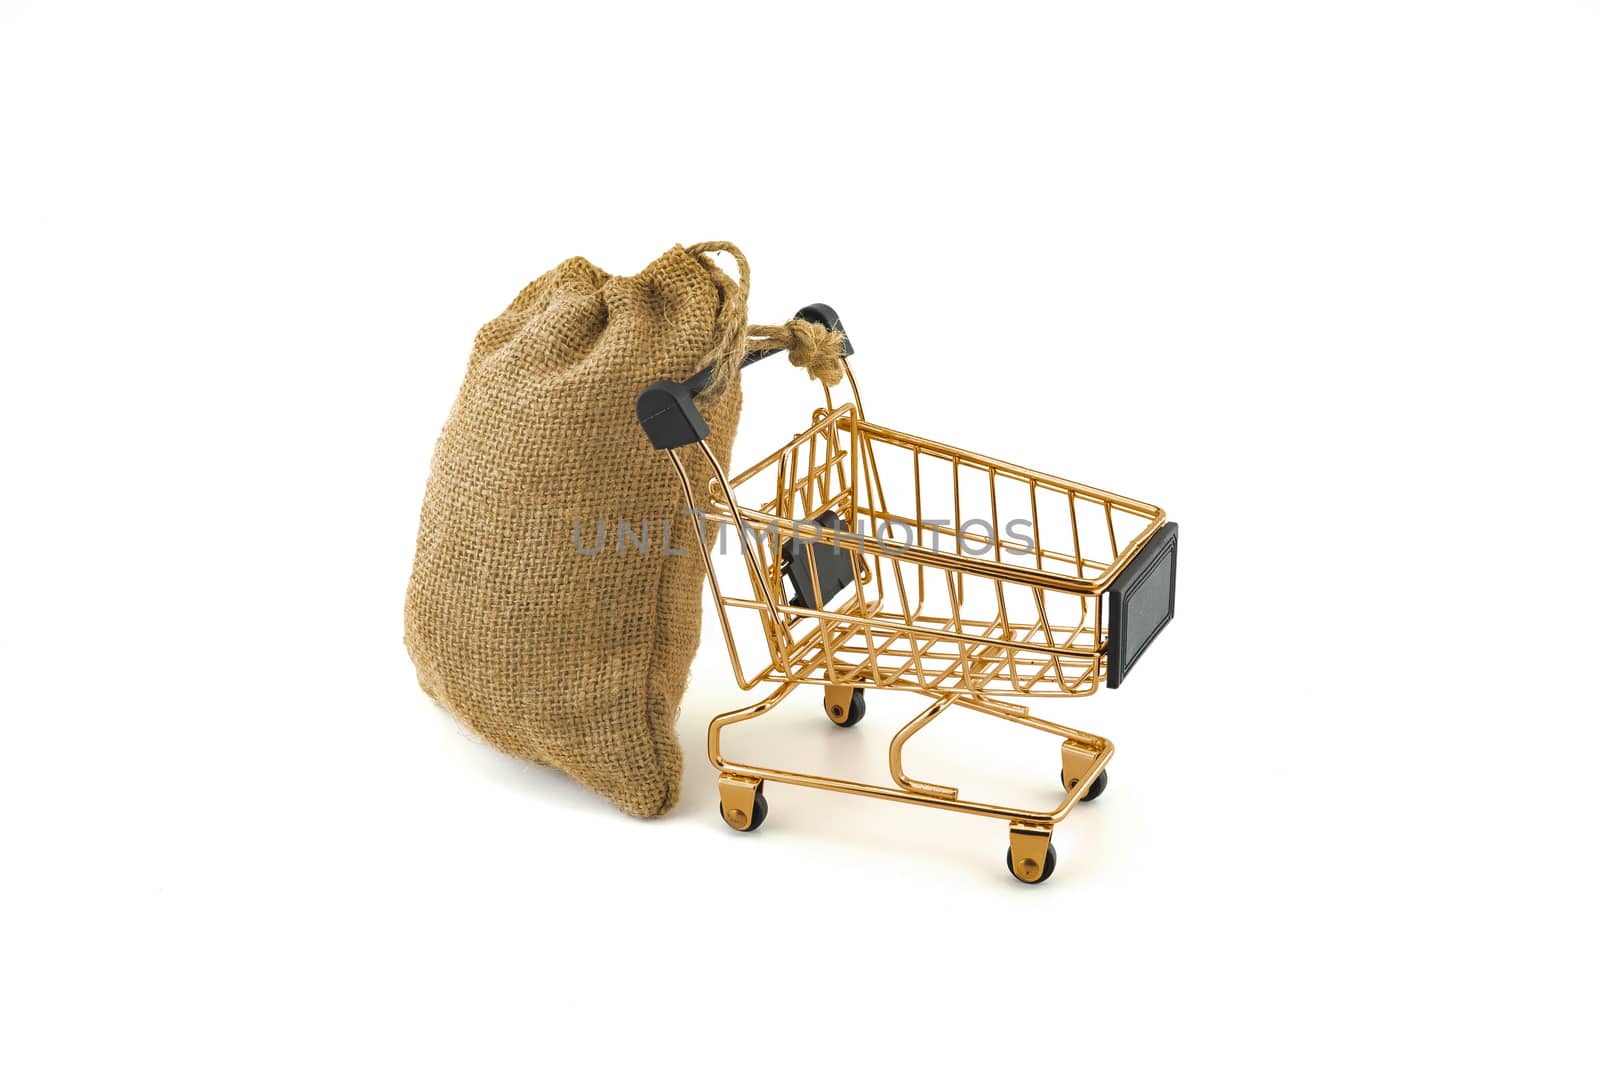 Empty golden shopping cart and jute bag isolated on white background